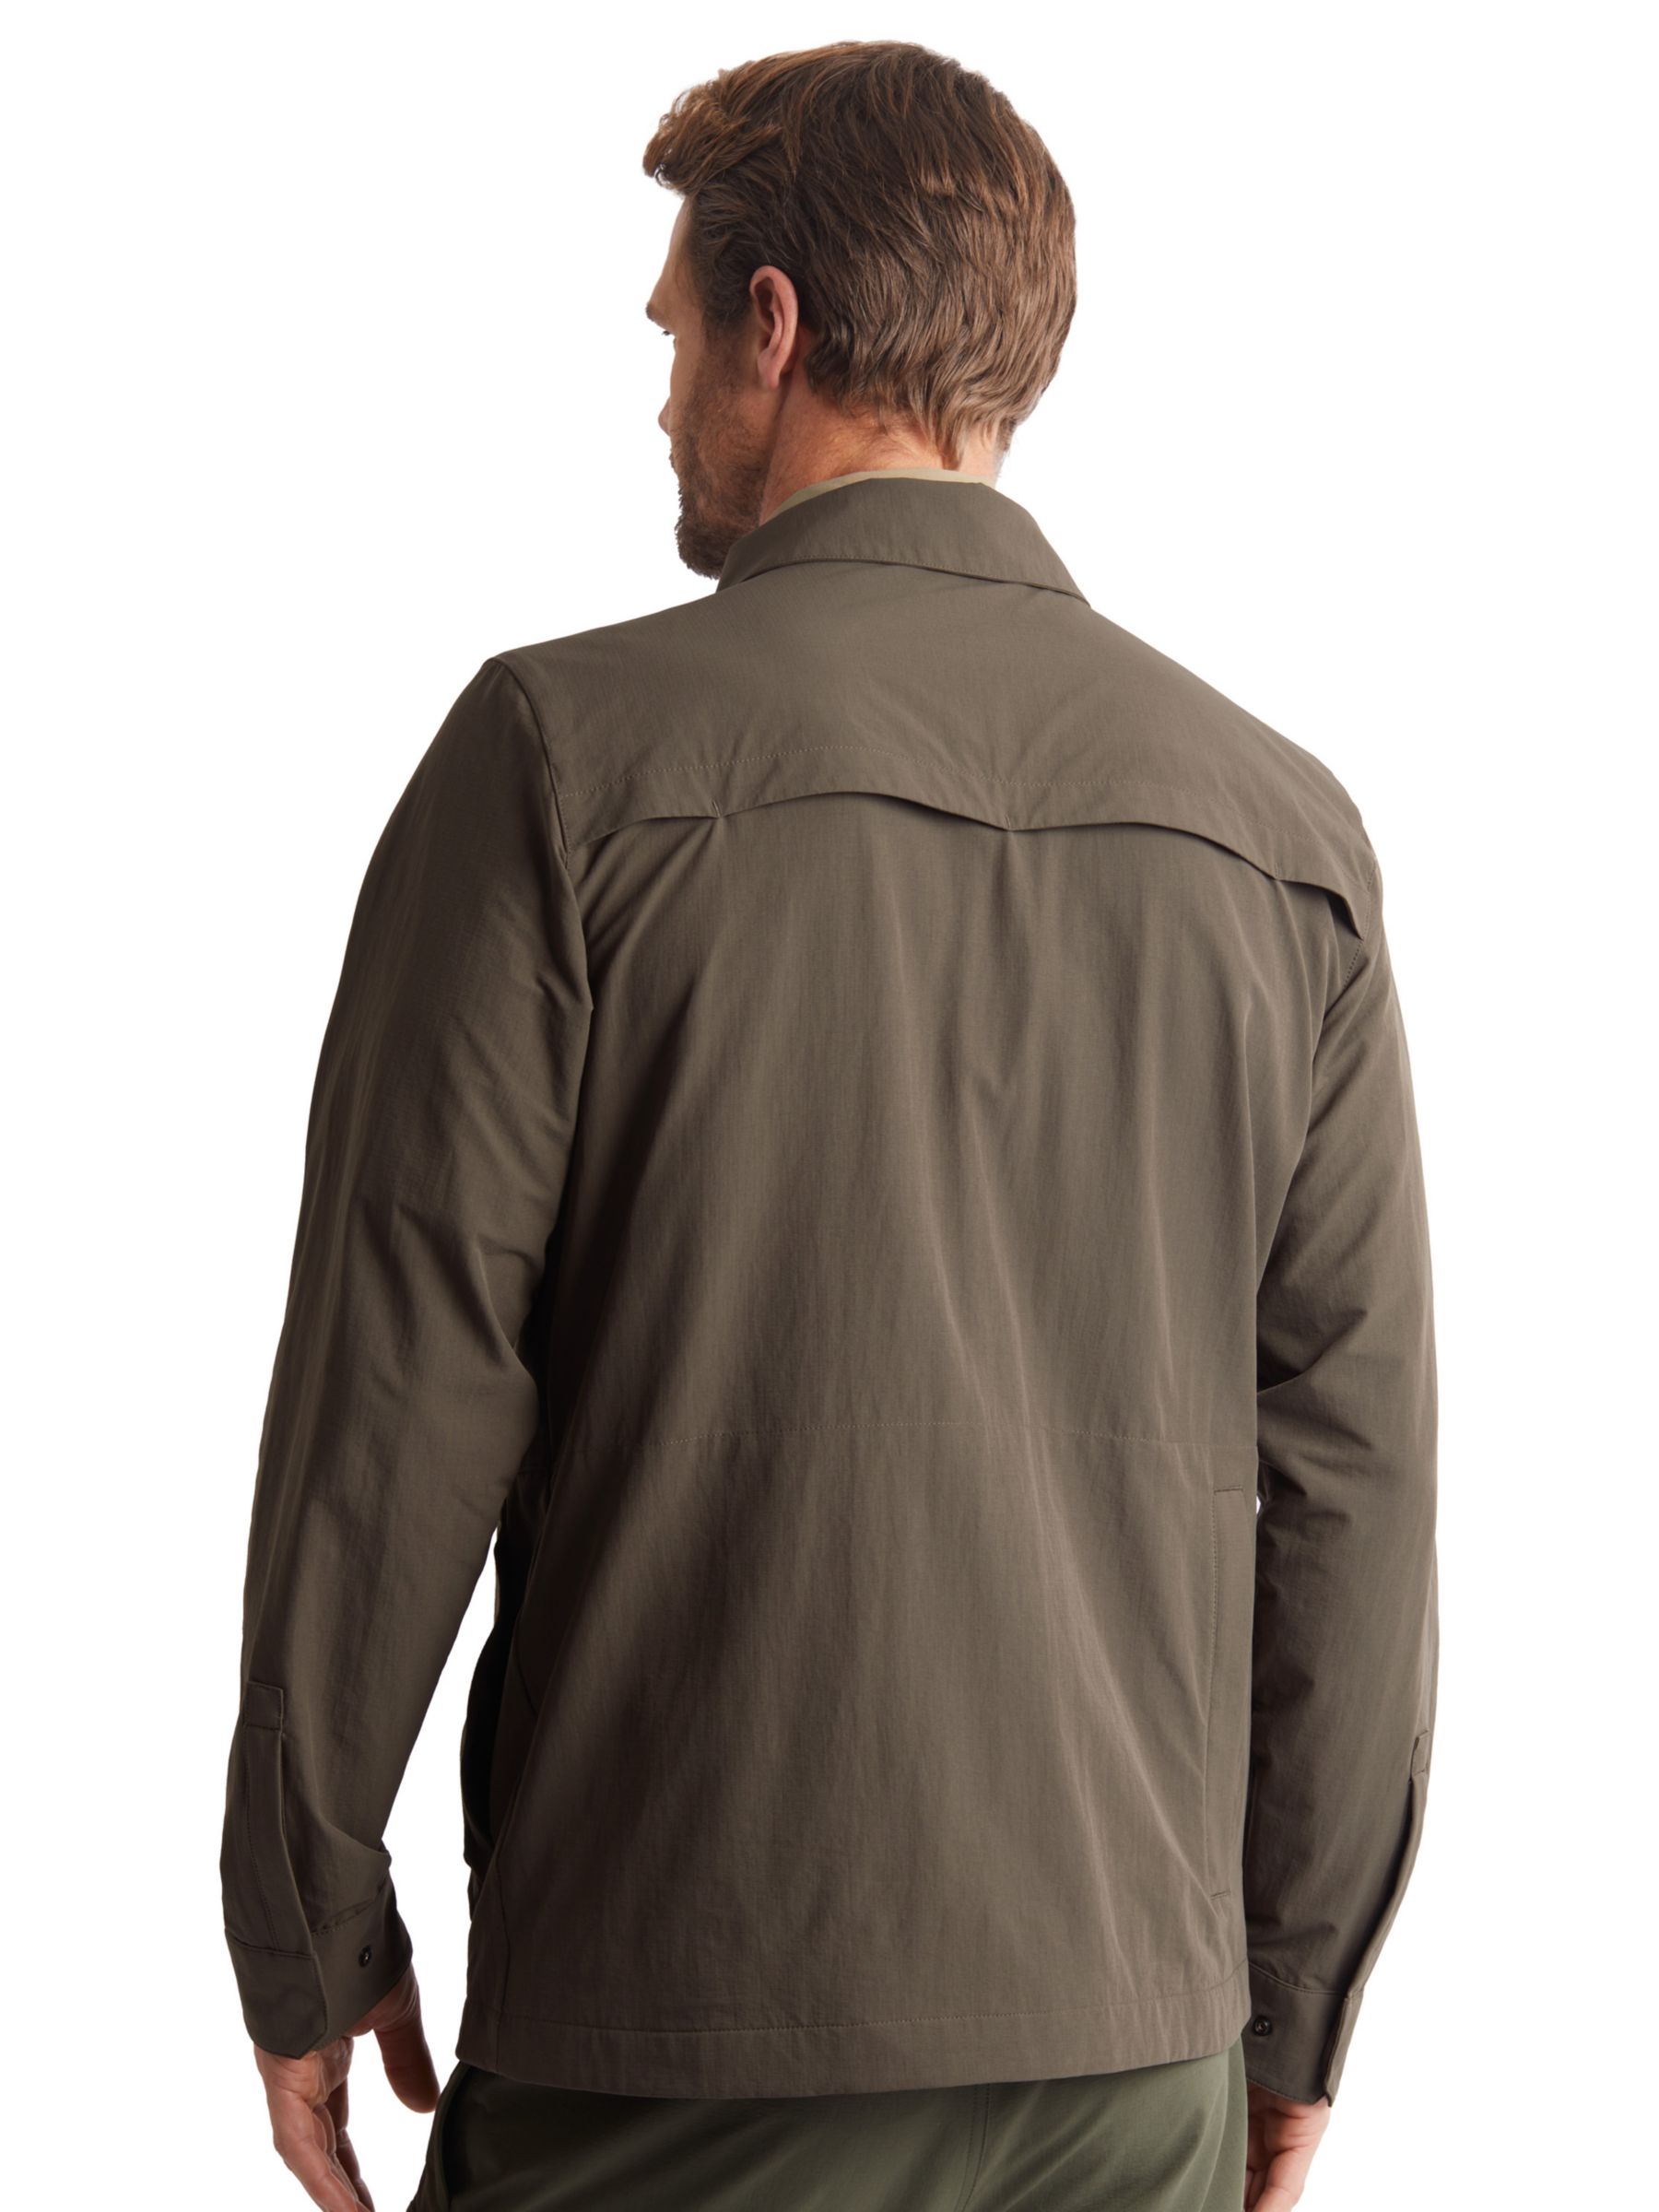 Rohan Frontier Anti-Insect Expedition Jacket, Dark Olive Brown, XS